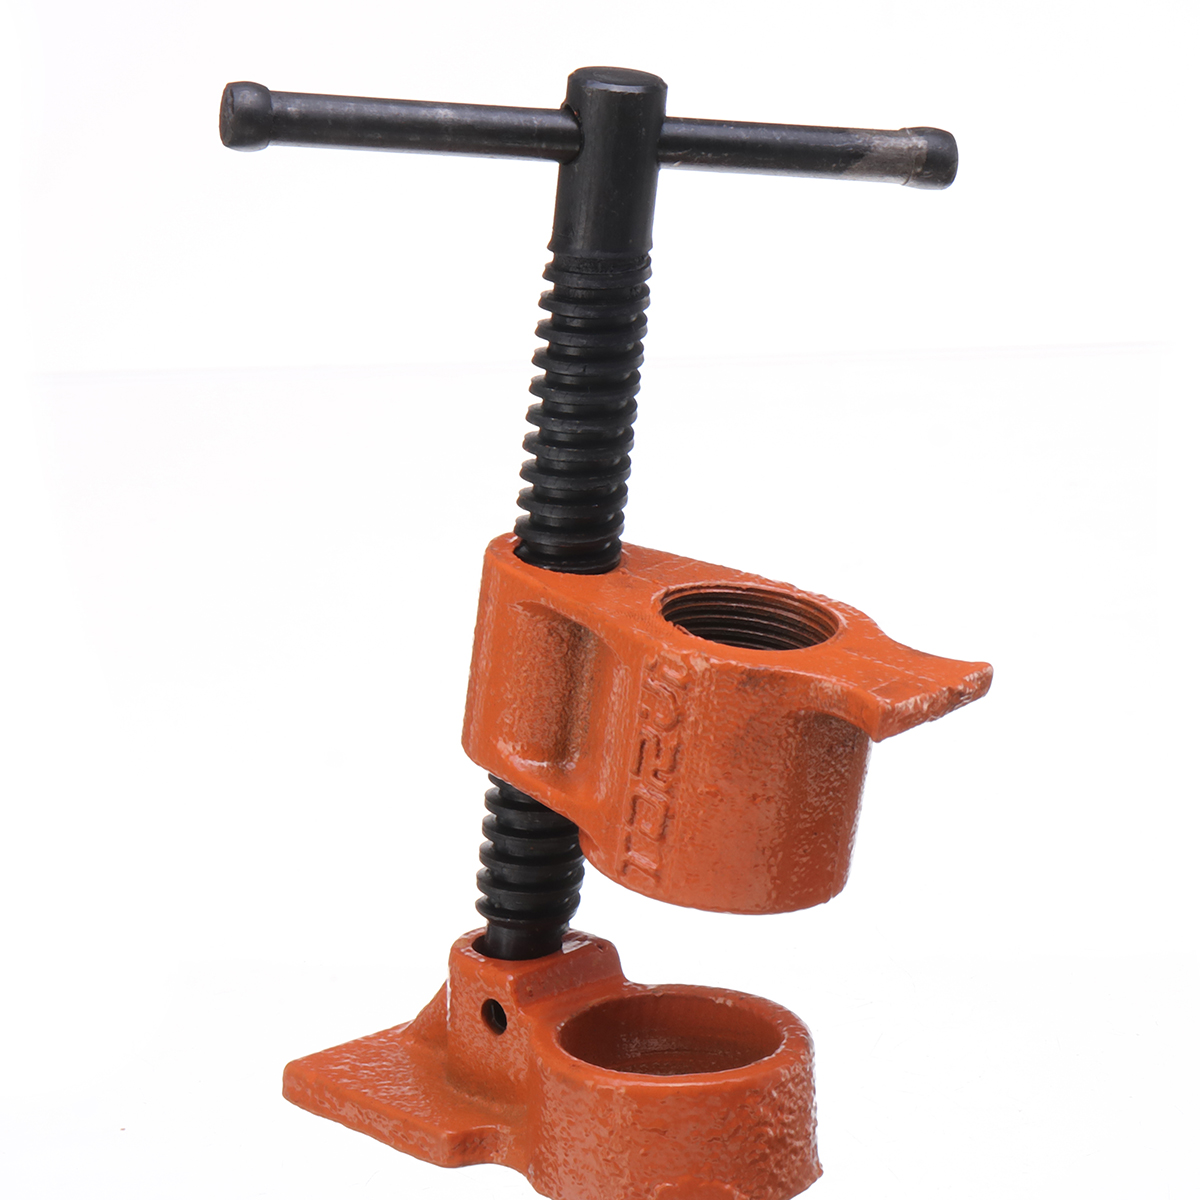 Wood-Gluing-Pipe-Clamp-34-Inch-Heavy-Duty-Woodworking-Cast-Iron-Pipe-Clamp-1471416-7